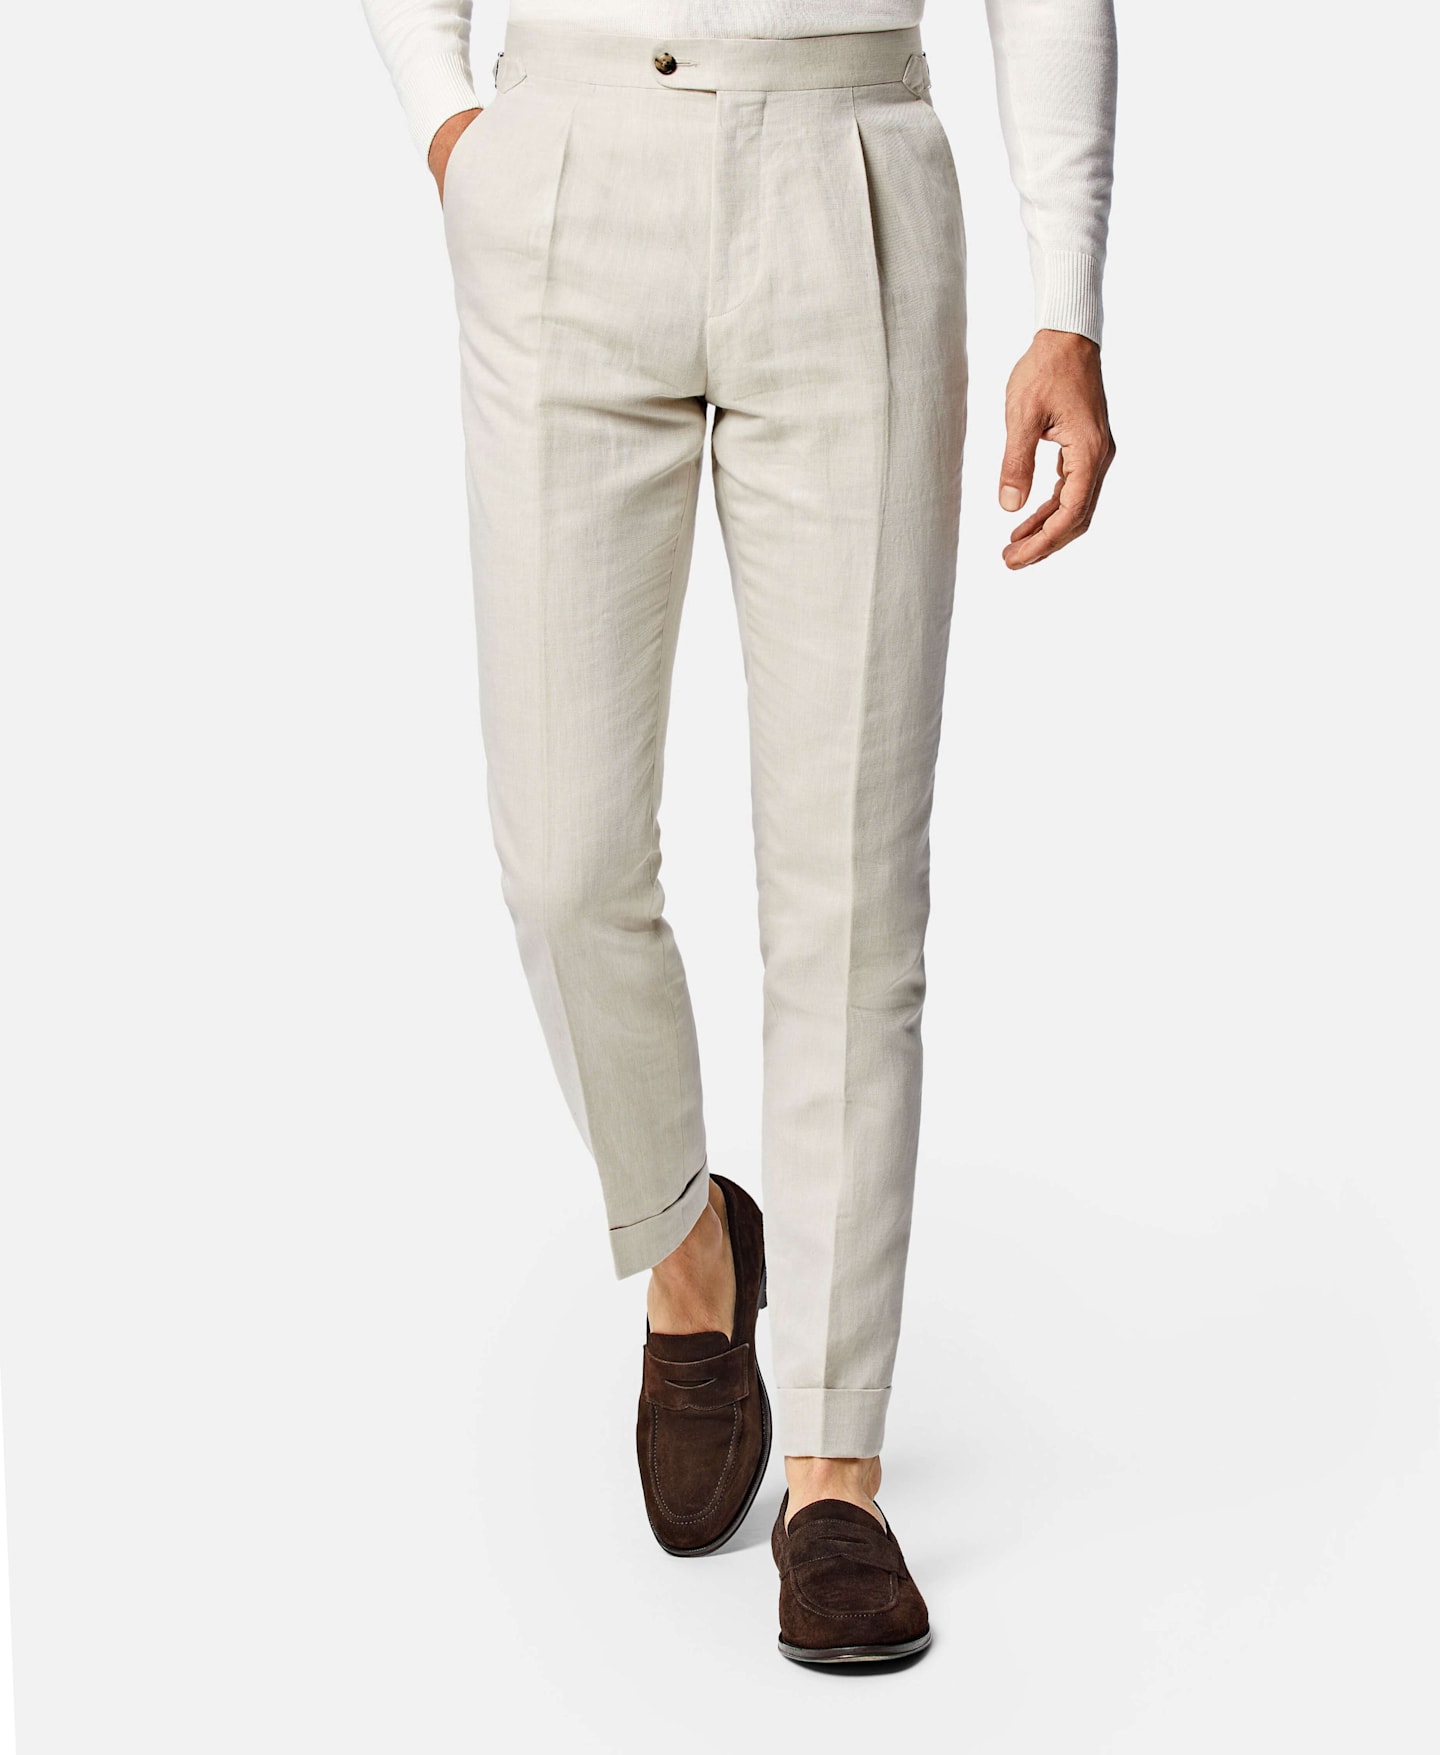 off-white linen single pleated pants paired with a brown loafer.